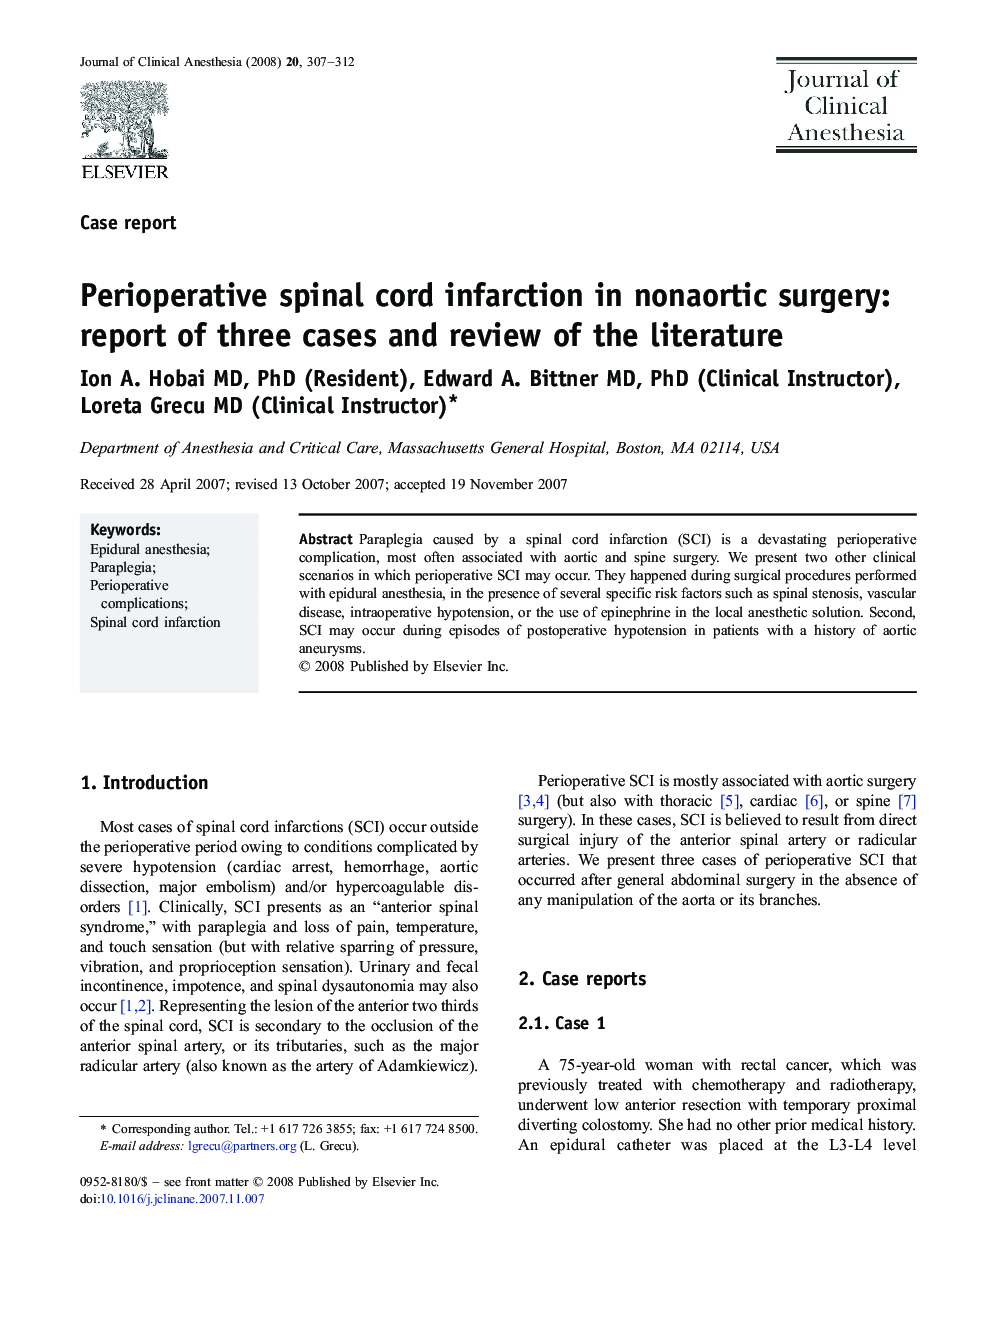 Perioperative spinal cord infarction in nonaortic surgery: report of three cases and review of the literature